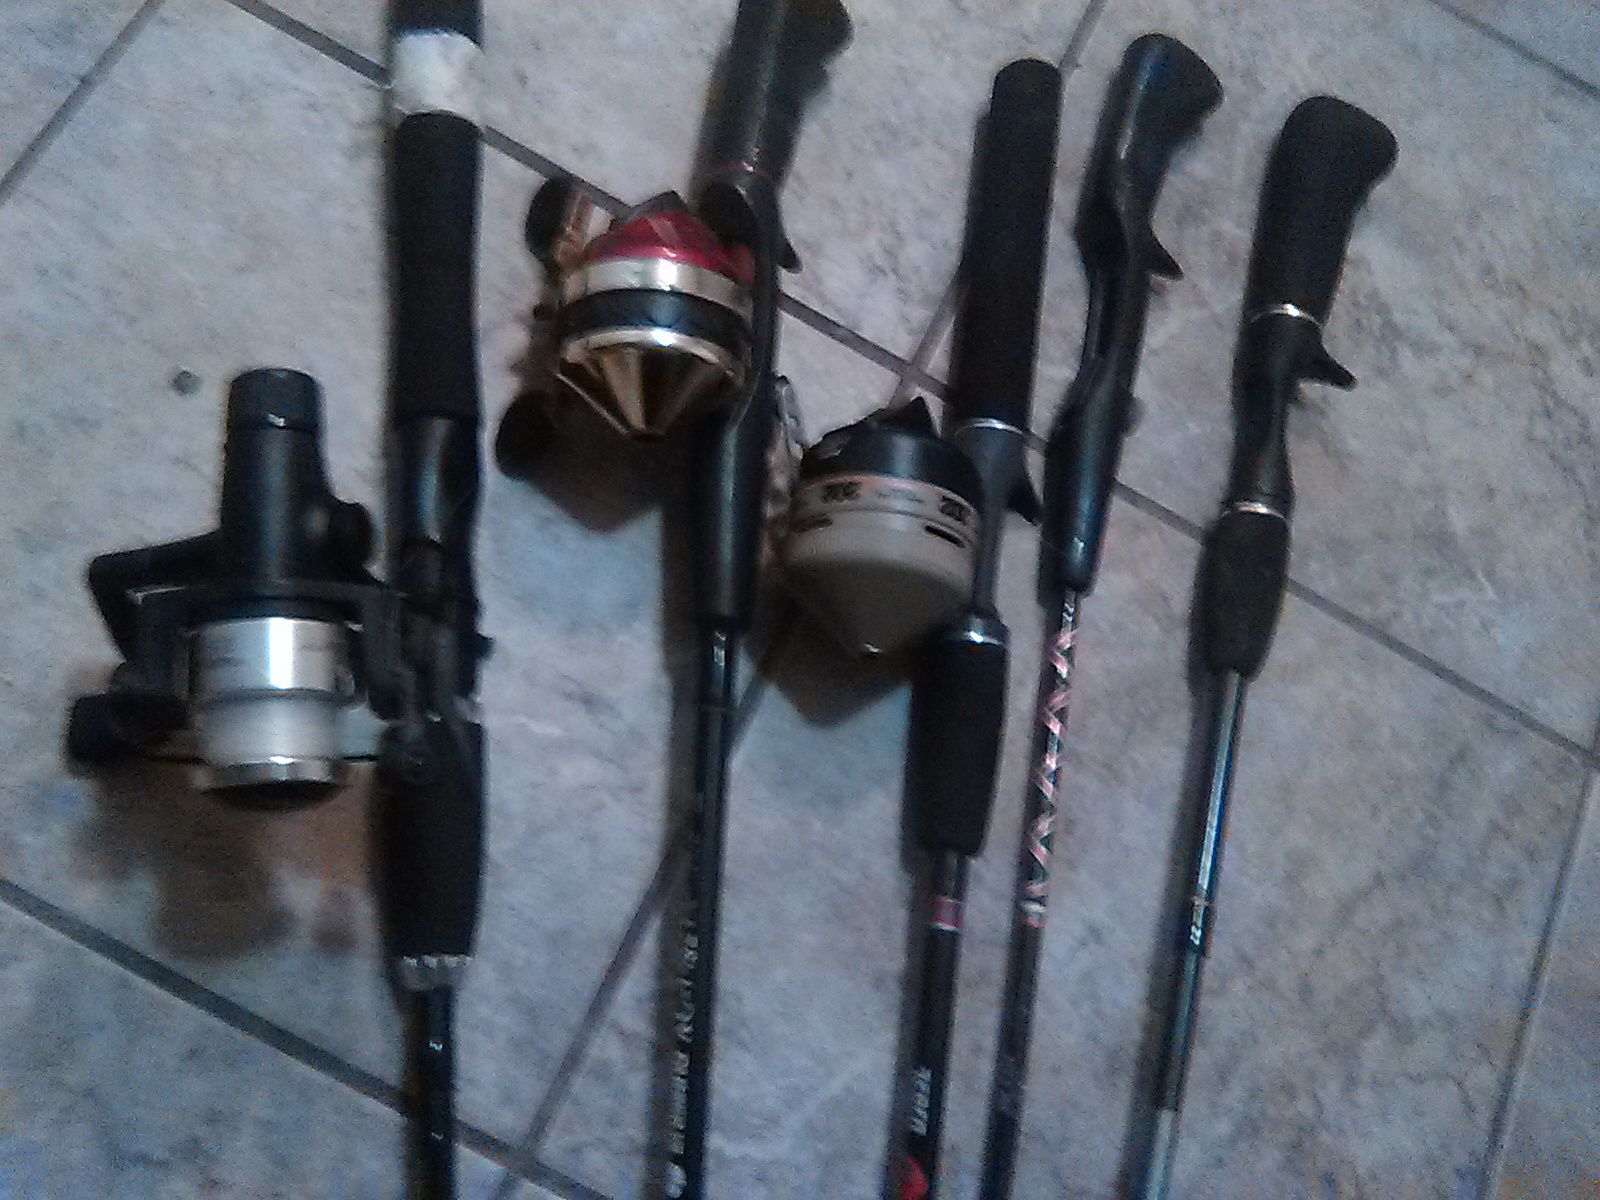 Assorted fishing rods, ,all good condition, make a fair offer,negotiable